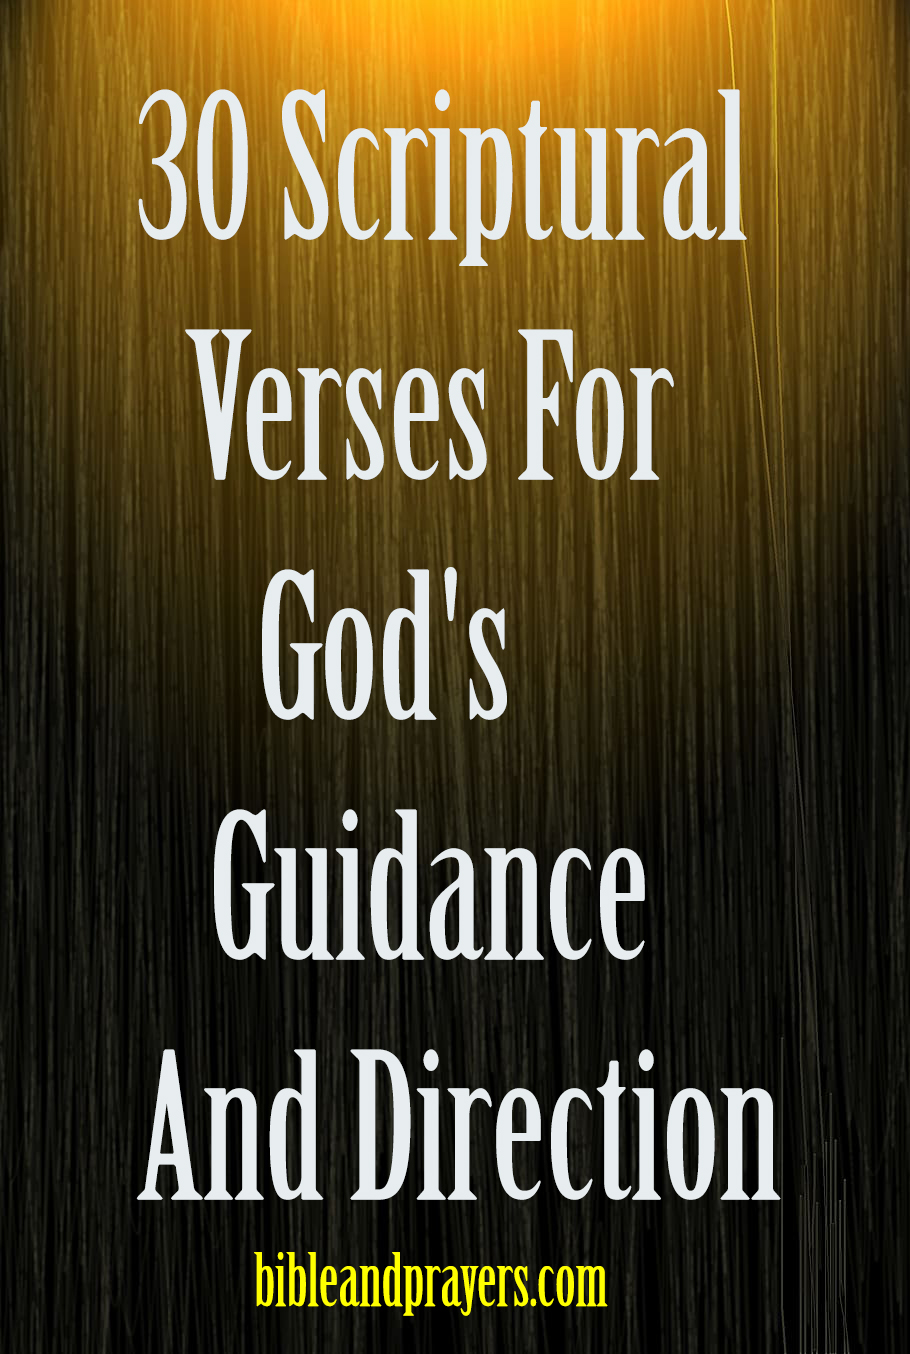 30 Scriptural Verses For God's Guidance And Direction